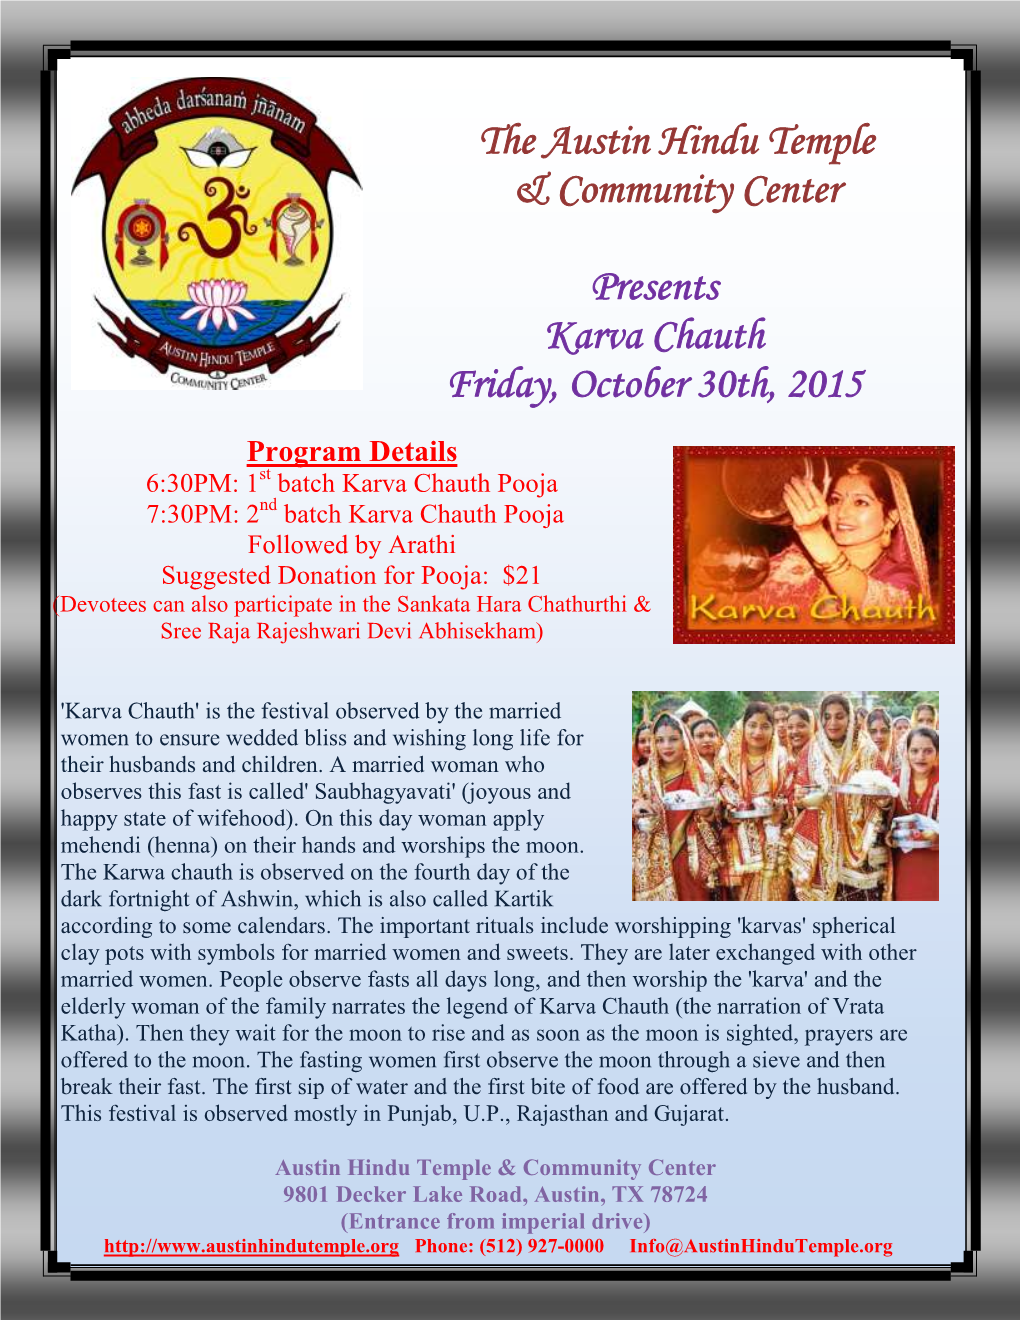 The Austin Hindu Temple & Community Center Presents Karva Chauth Friday, October 30Th, 2015